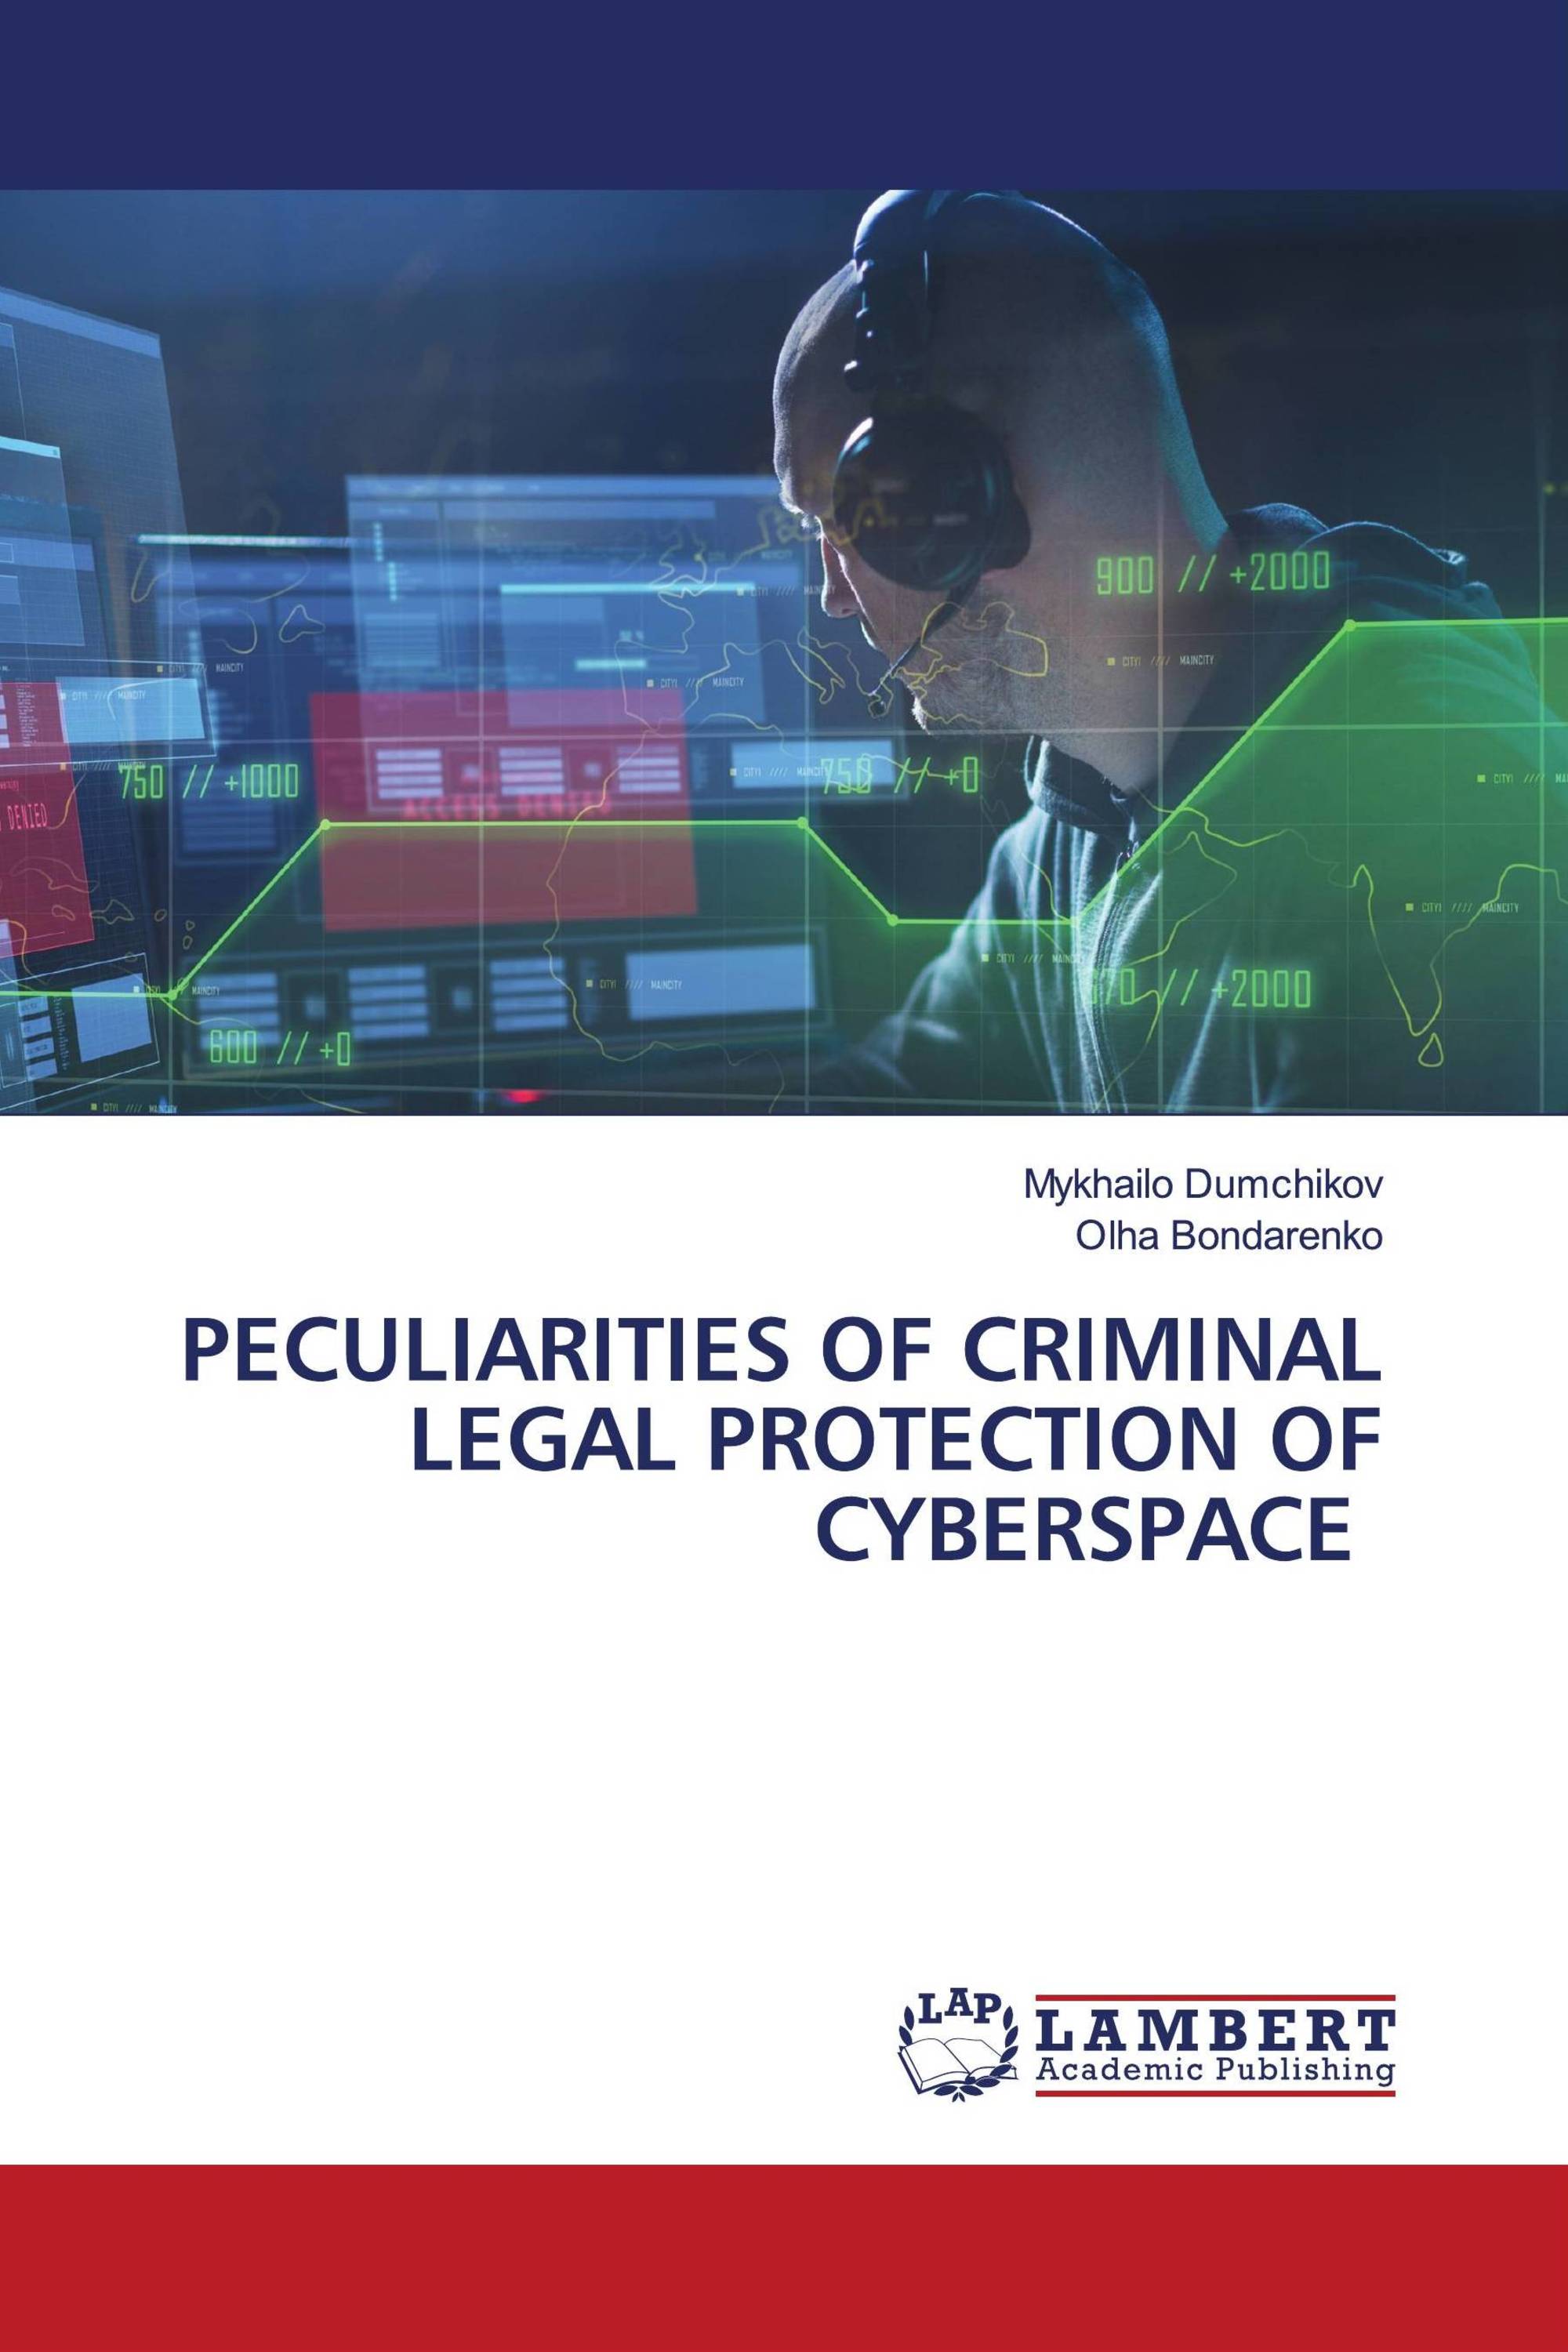 PECULIARITIES OF CRIMINAL LEGAL PROTECTION OF CYBERSPACE